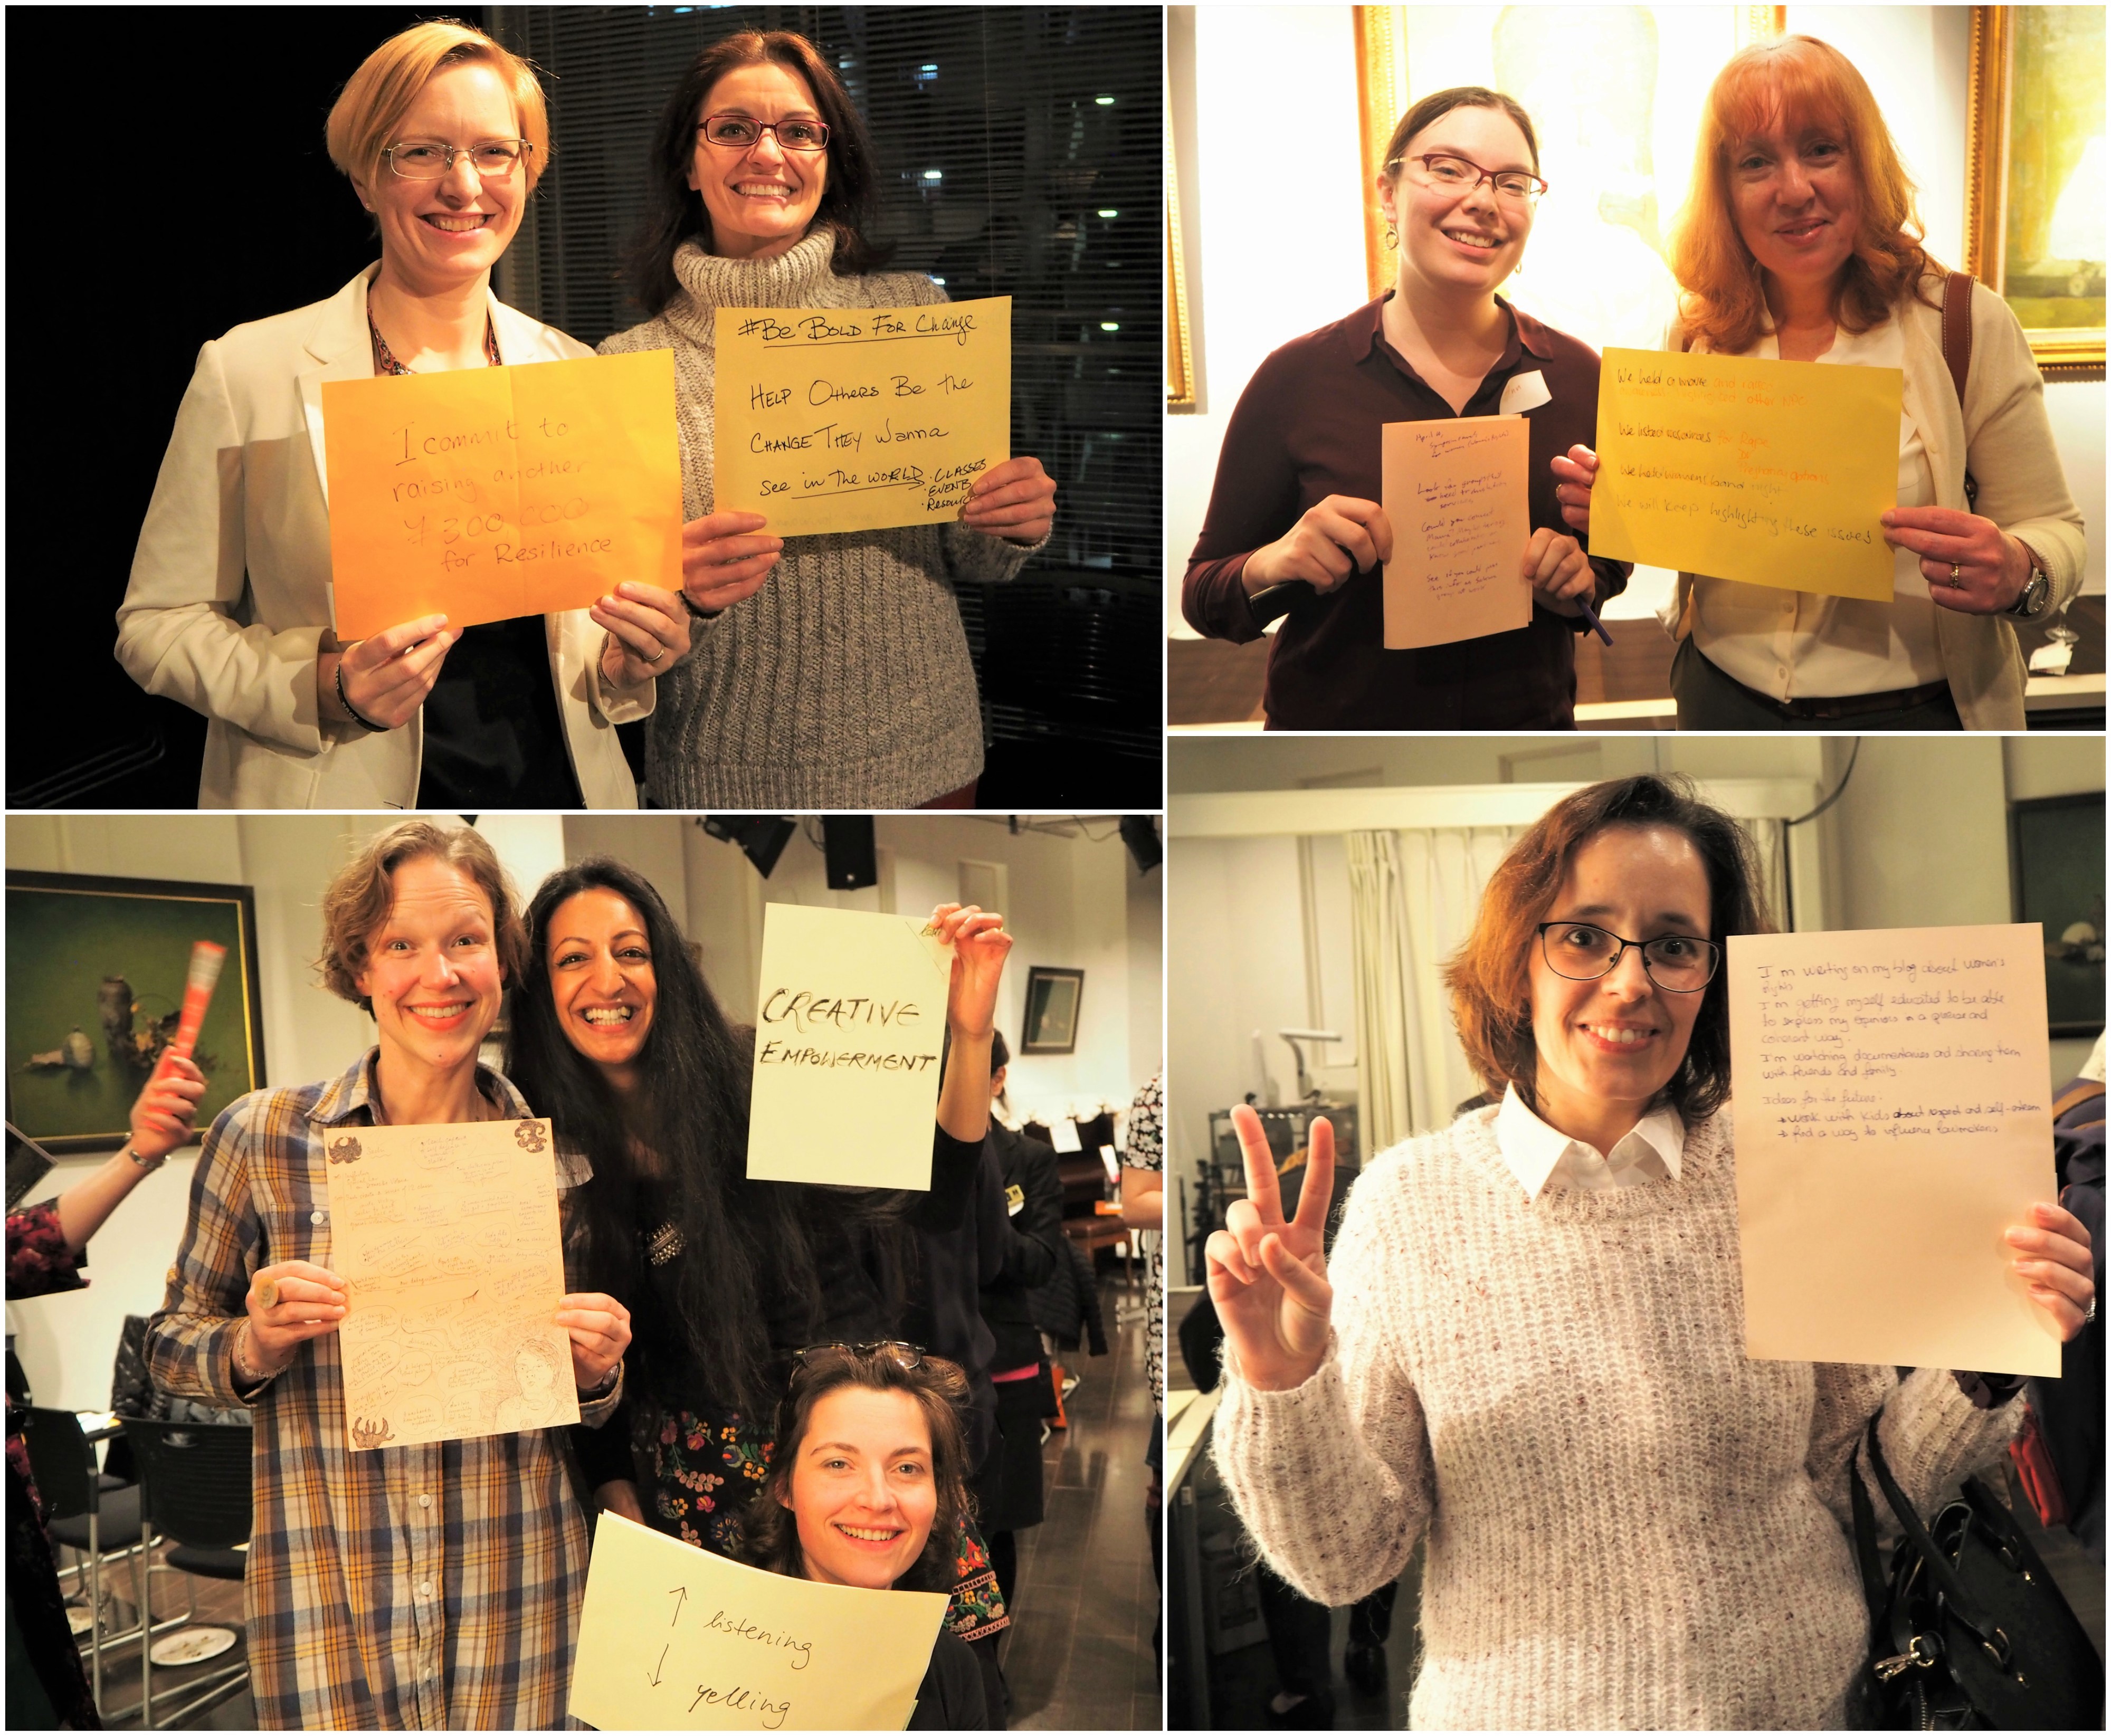 Participants shared their commitments to #BeBoldForChange.